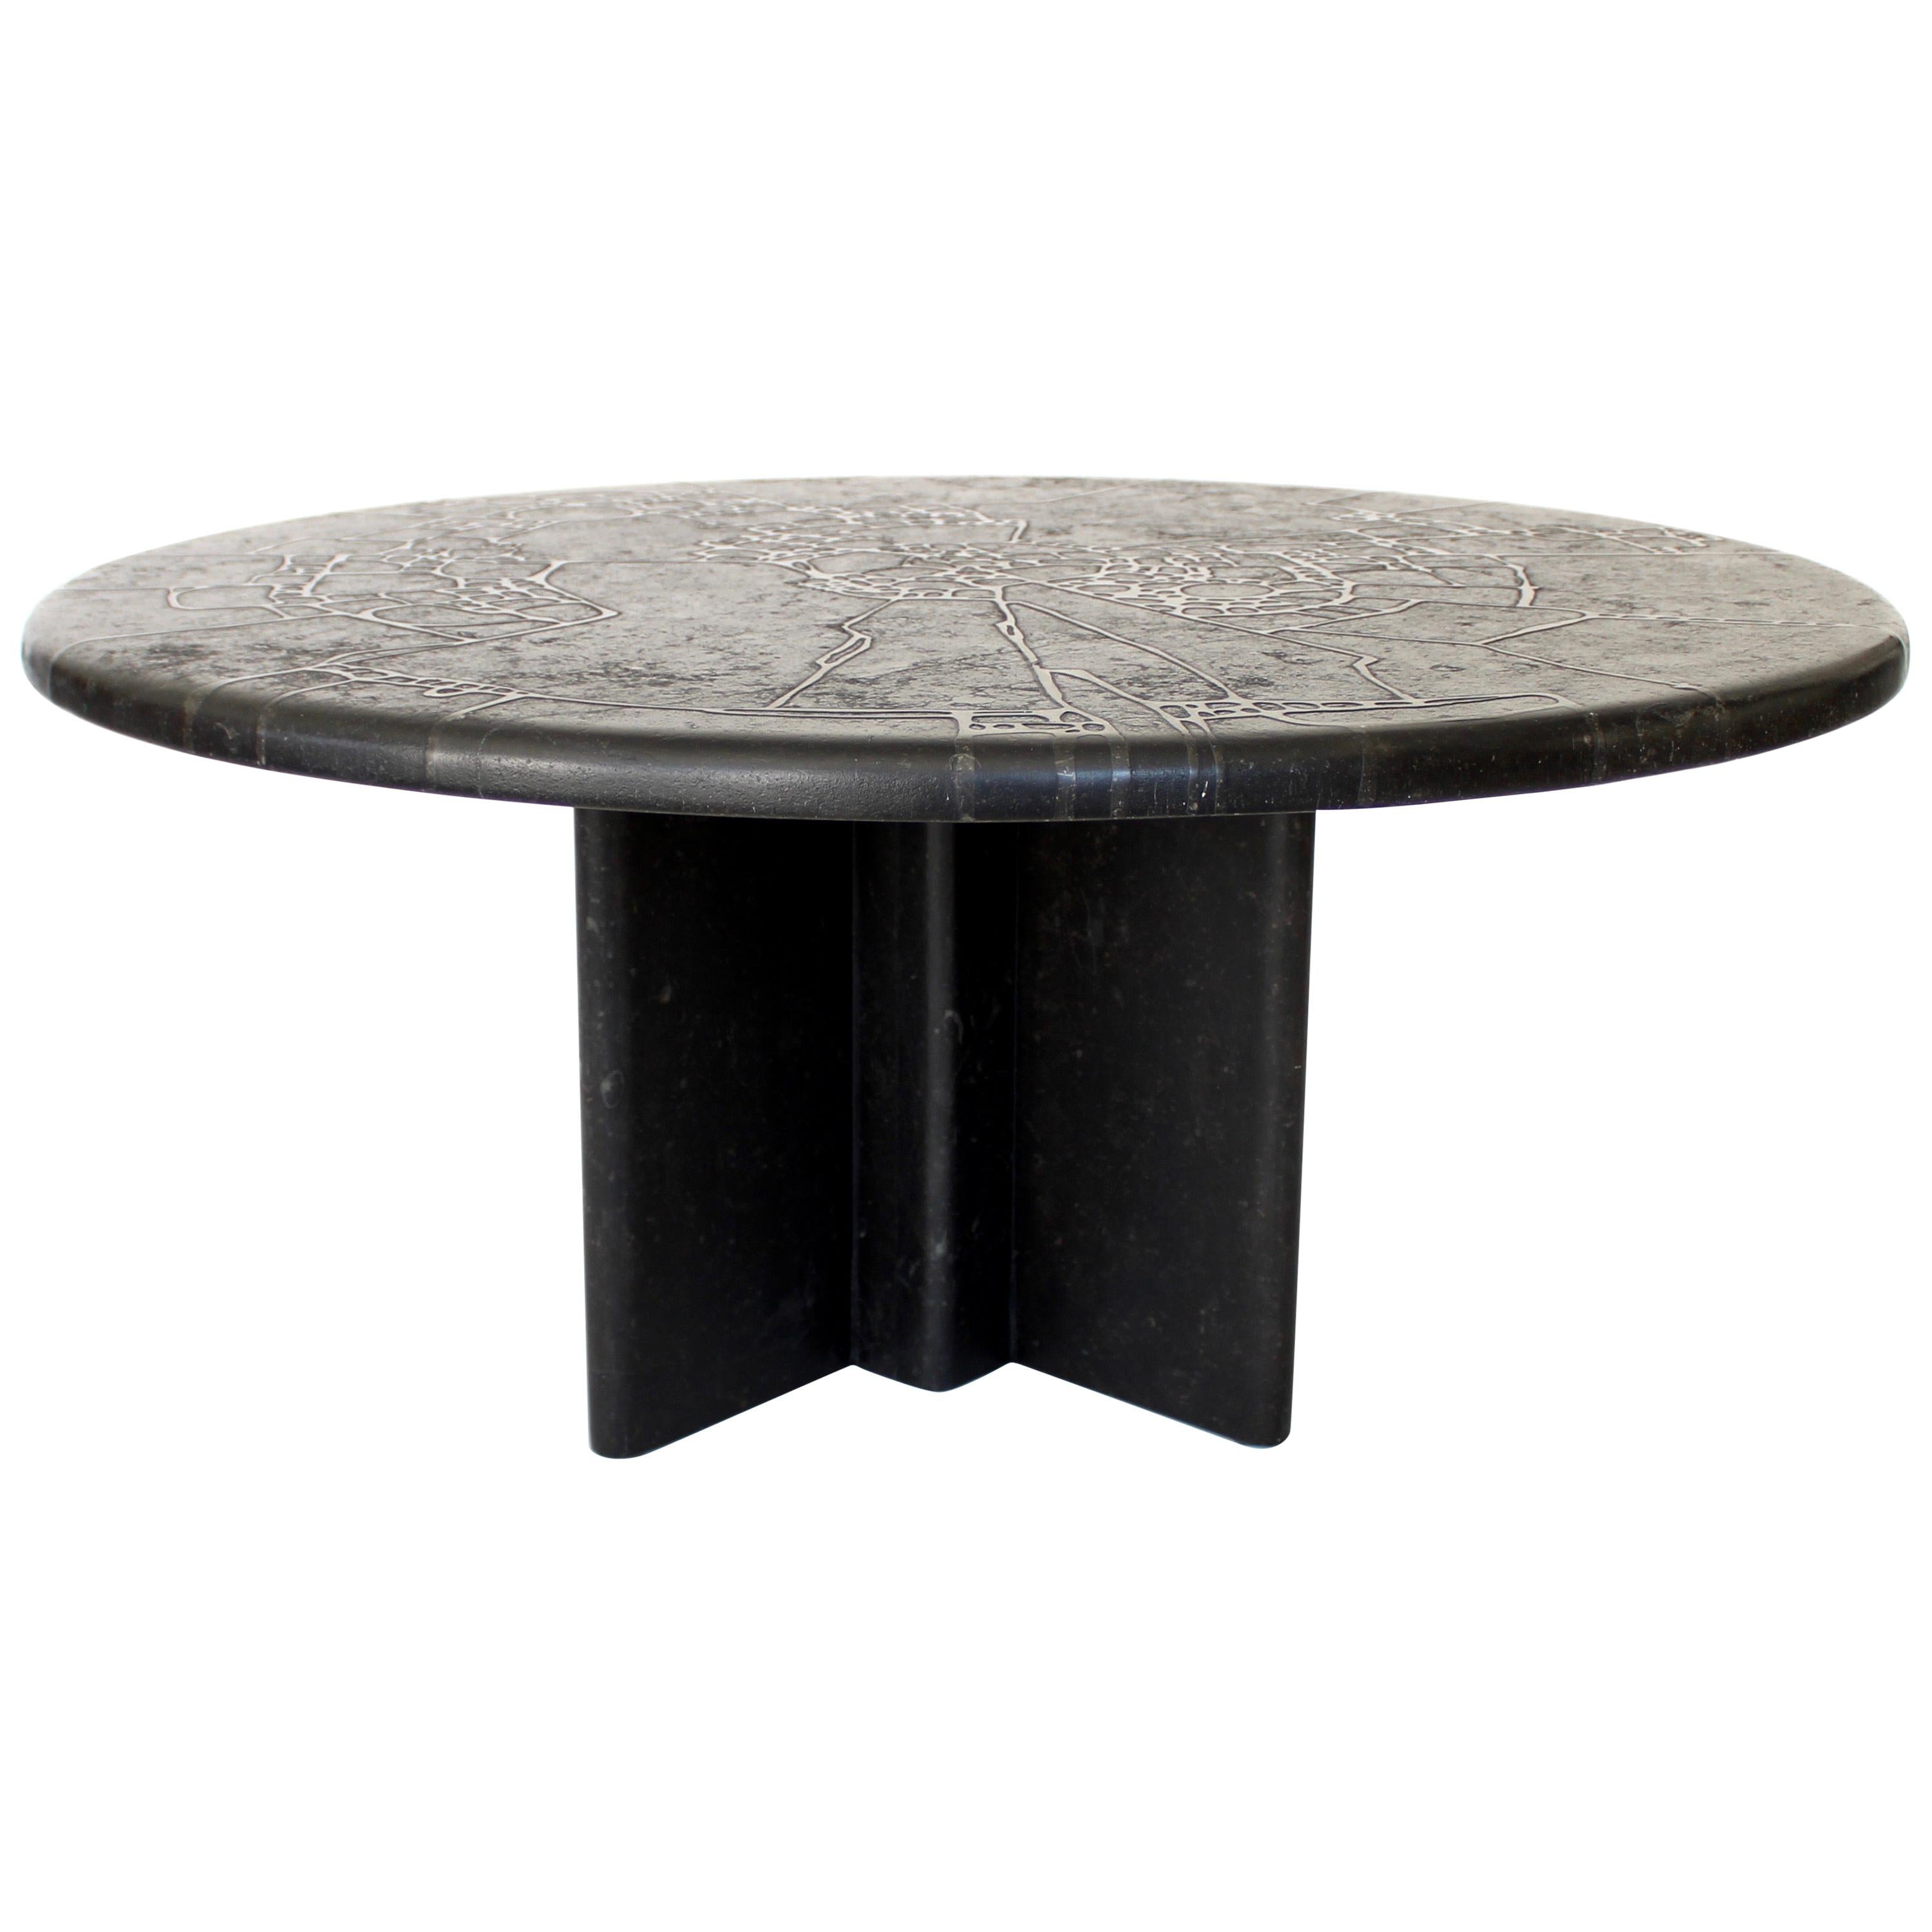 Black Marble Round Low French Coffee Table Carved Engraved or Incised Pattern 